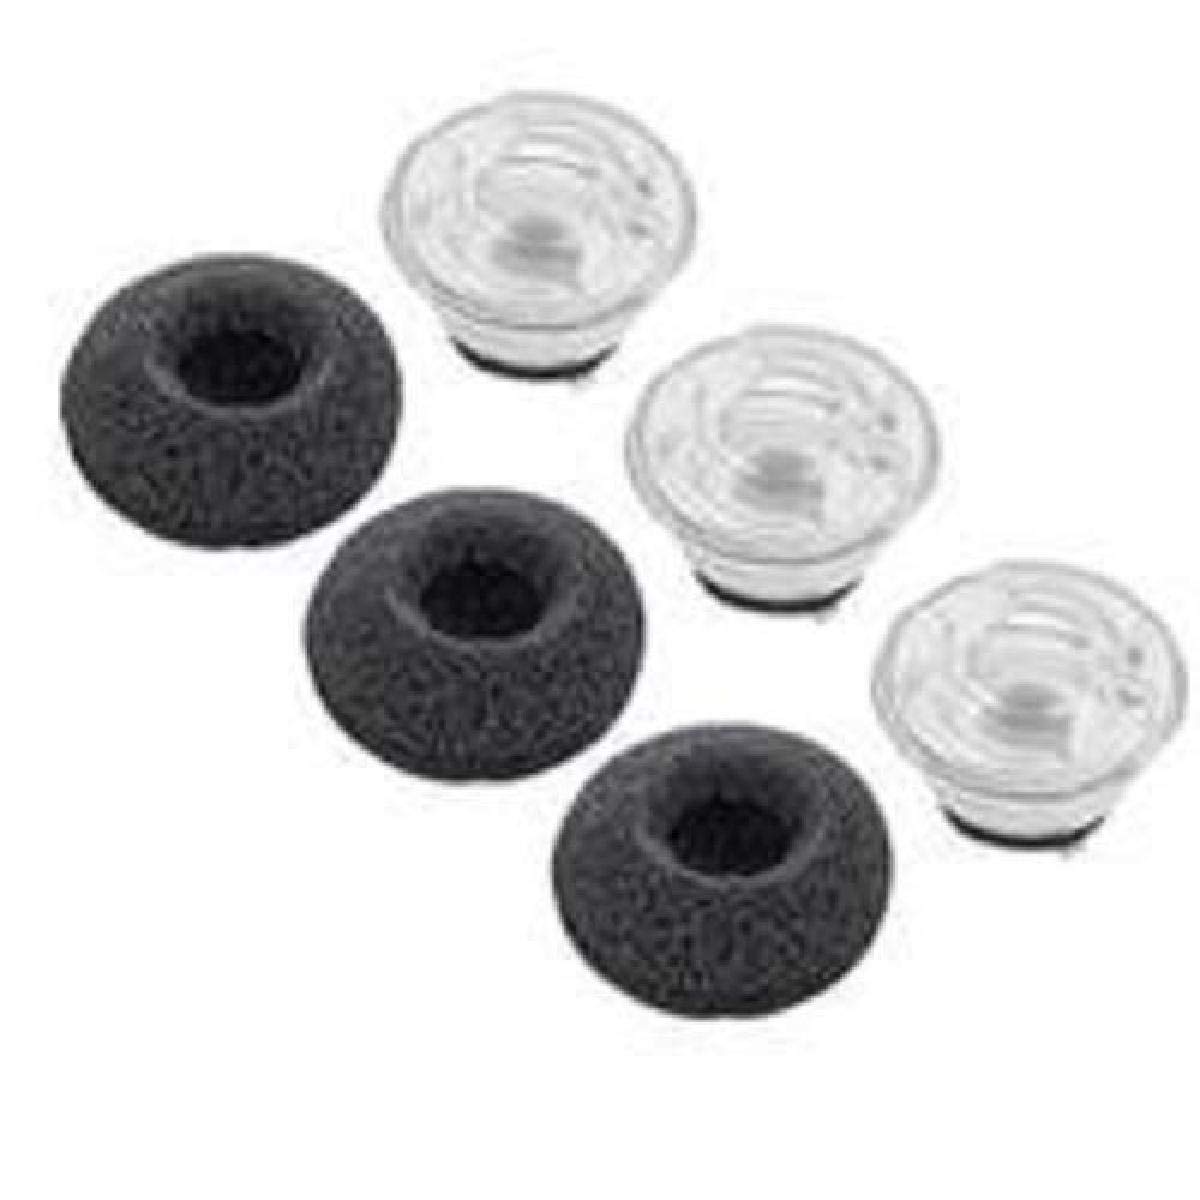 SPARE EAR TIP KIT SMALL AND